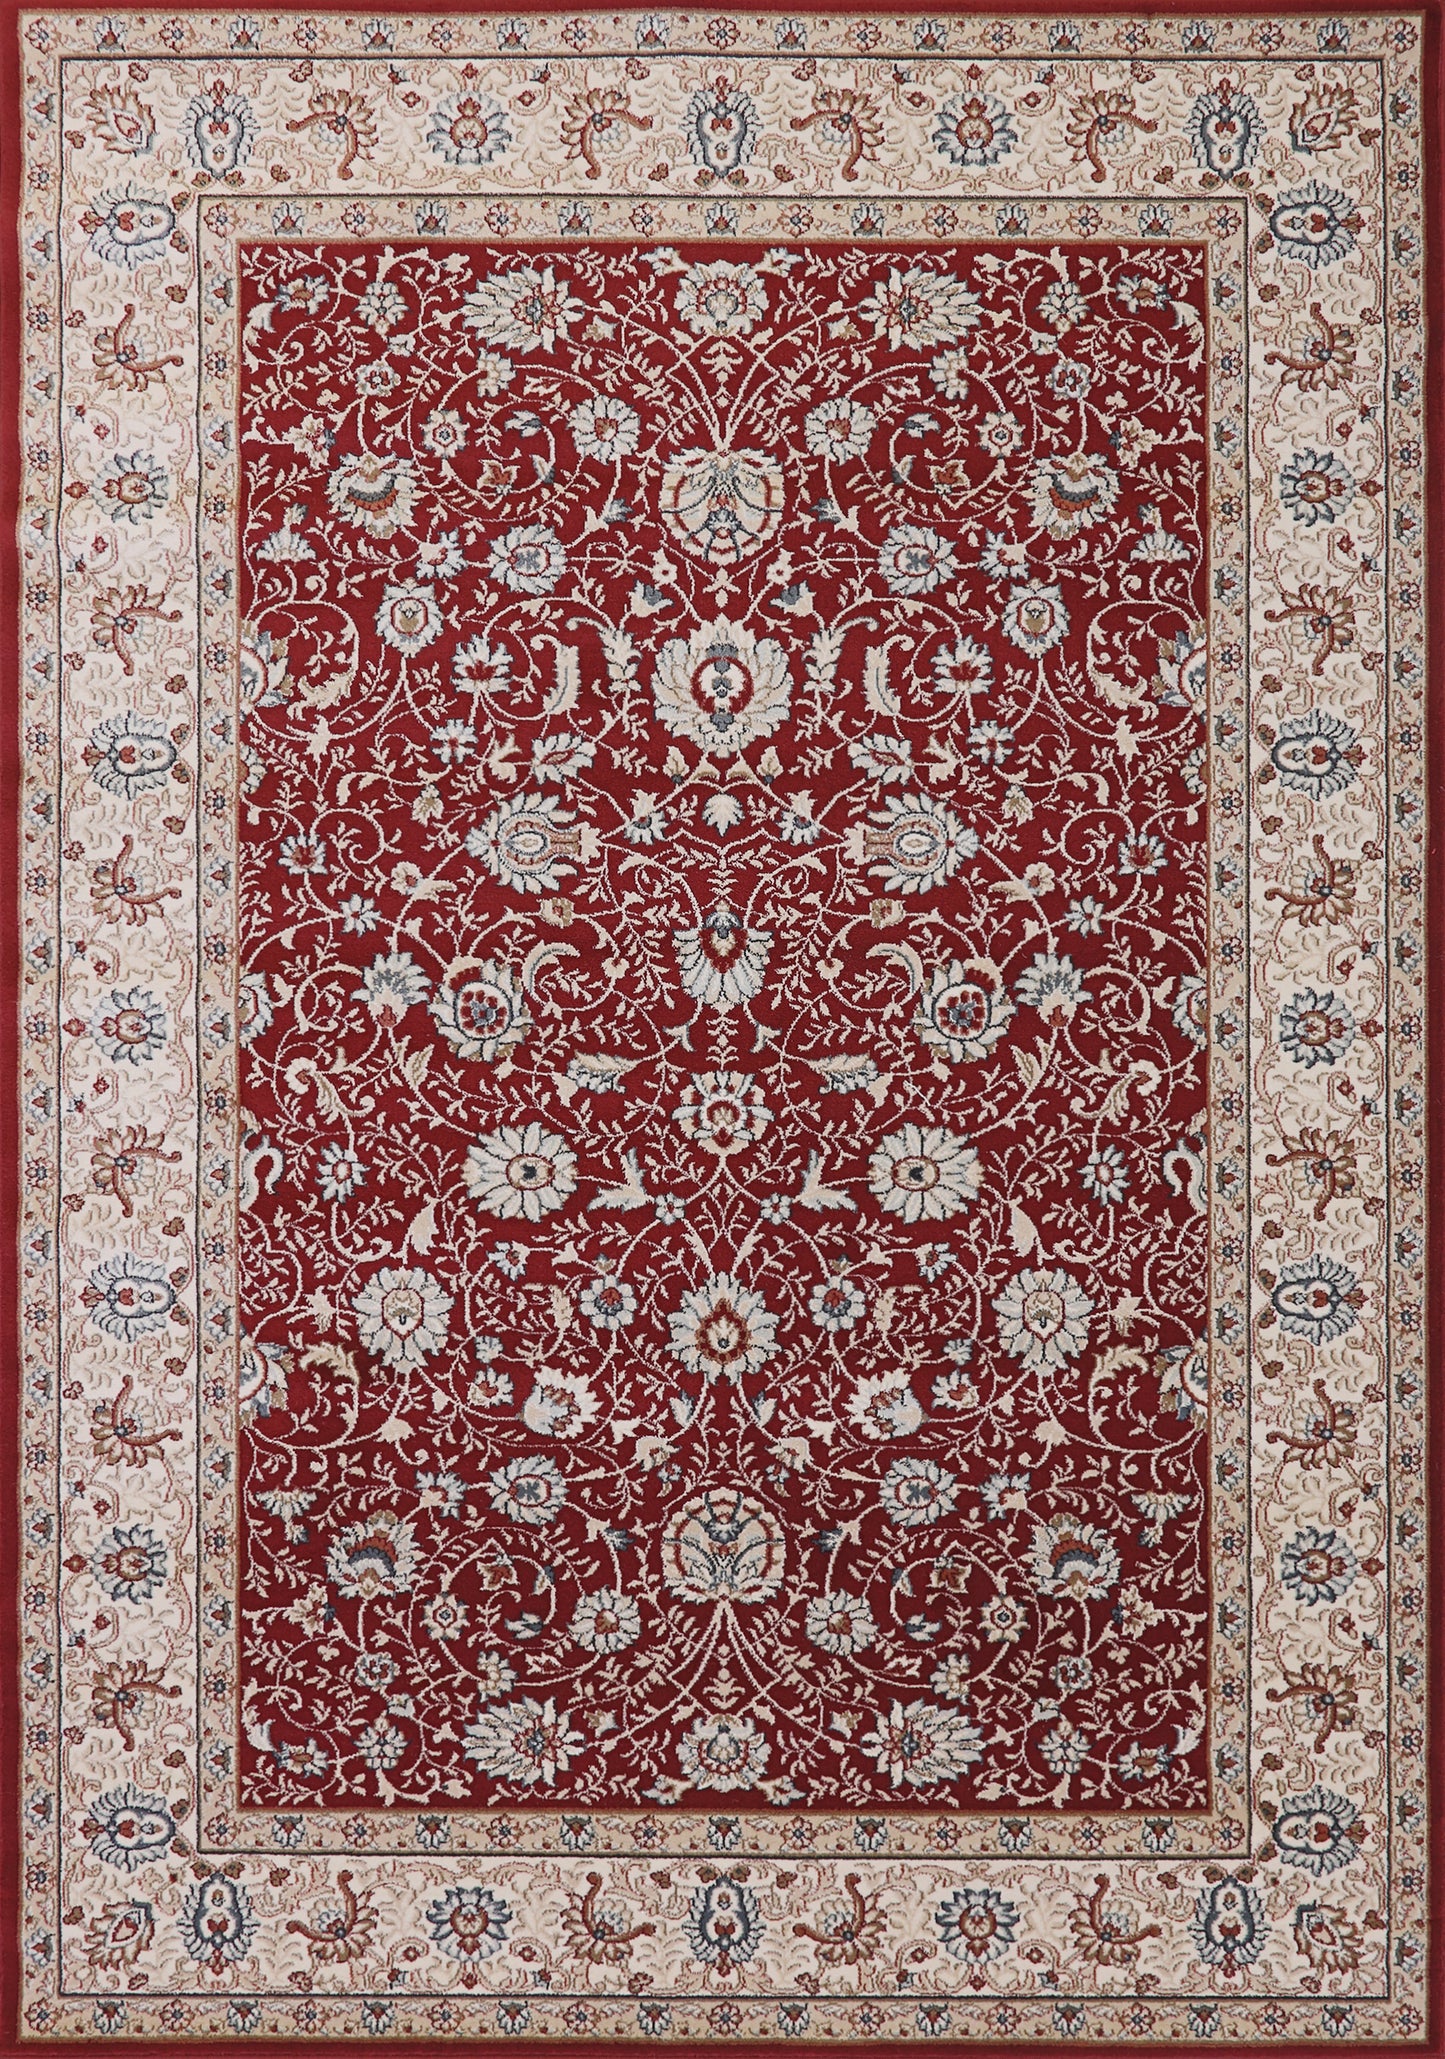 Melody 985022-339 Red Area Rug